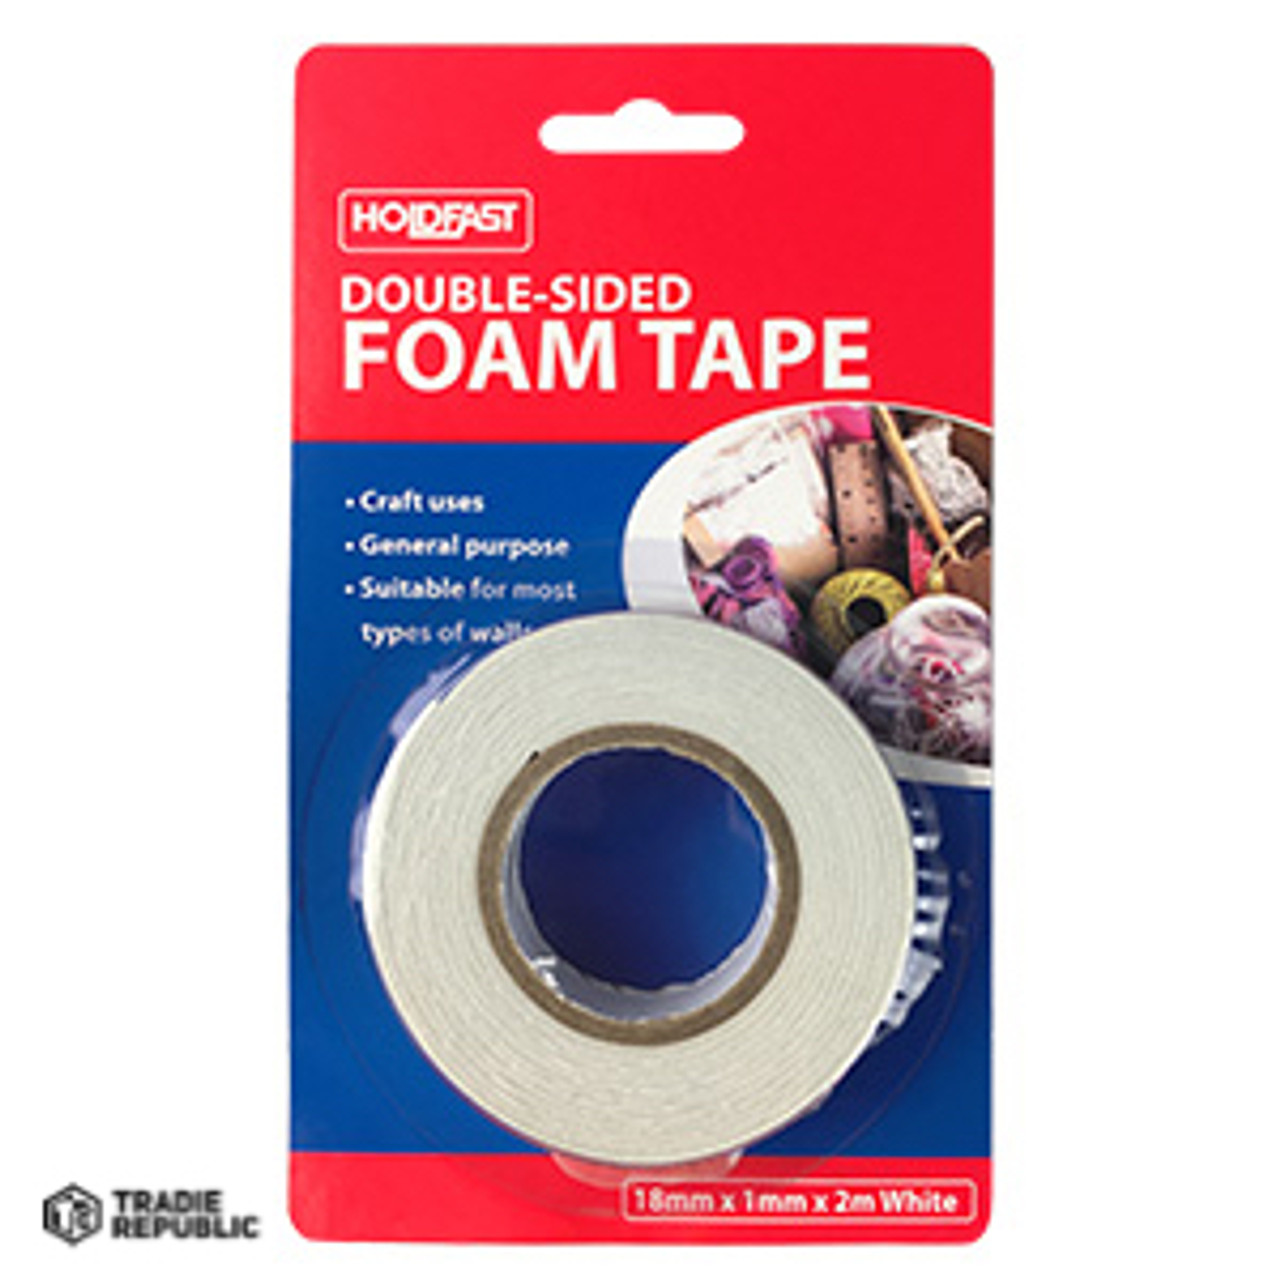 00163 Holdfast Double Sided Foam Tape 18mm x 1.0mm x 2metres White